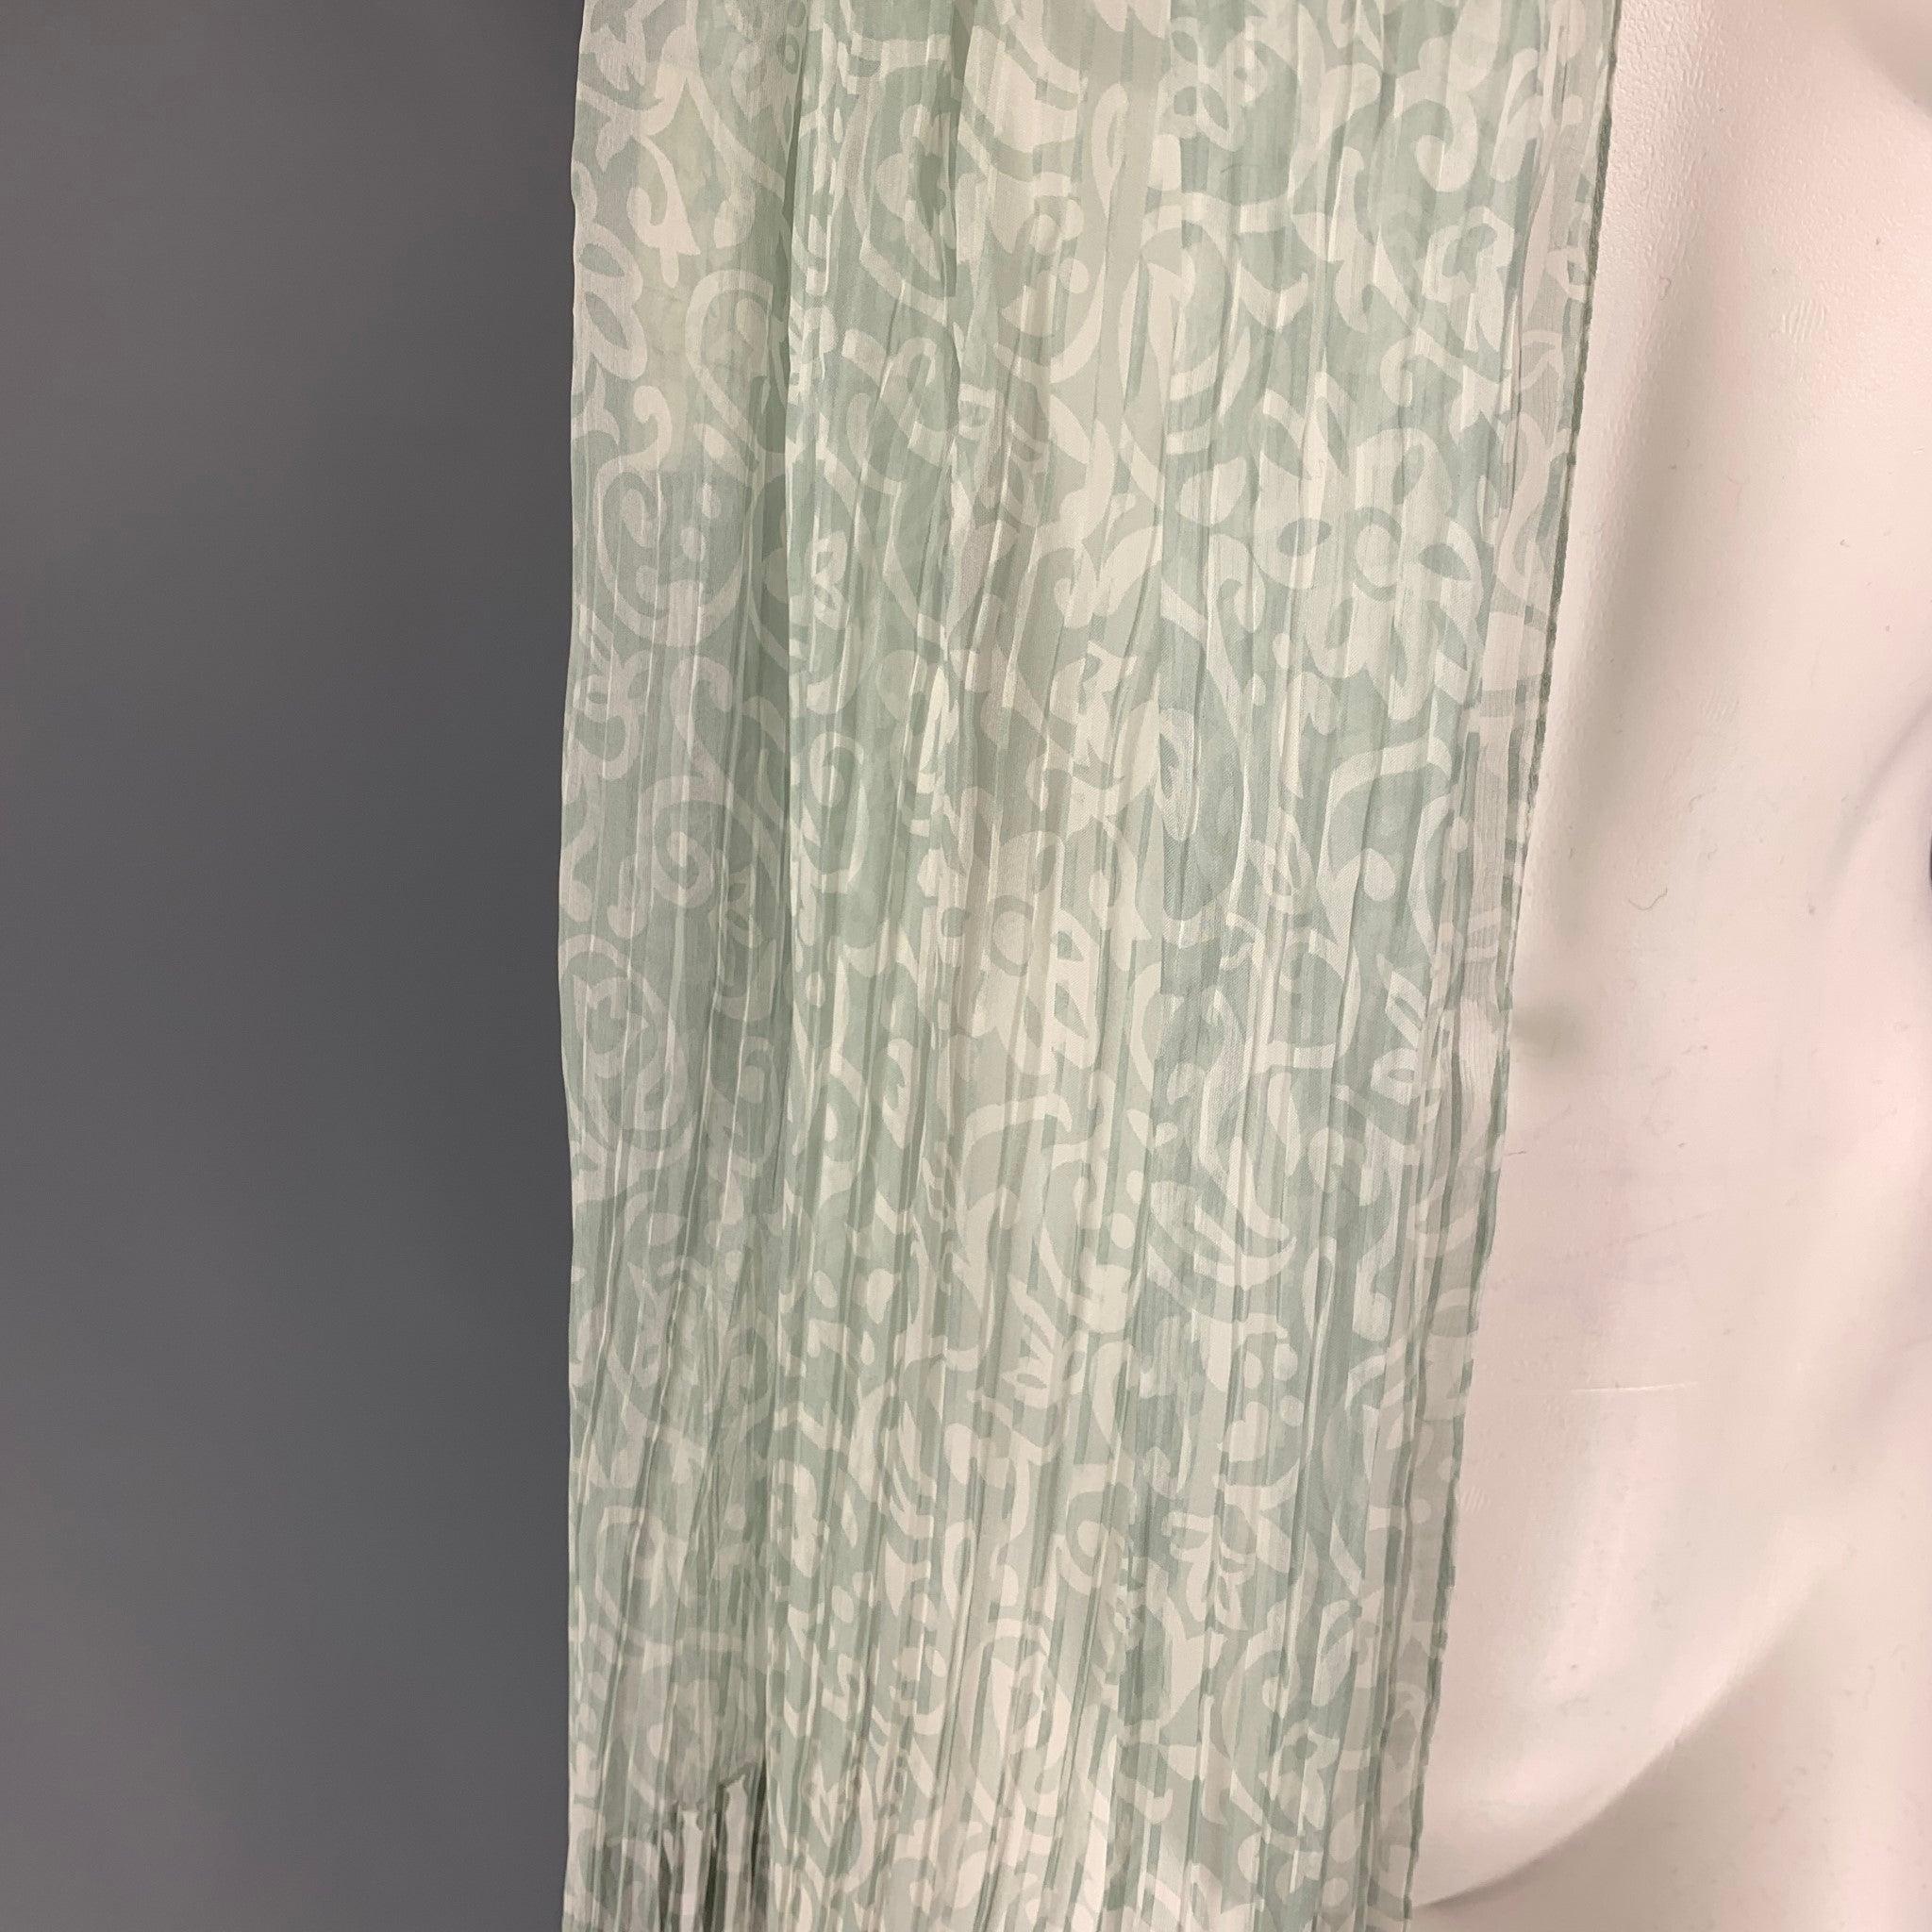 GIORGIO ARMANI scarf comes in a moss print silk with a fringe trim. Includes tags. Made in Italy.
Very Good
Pre-Owned Condition. 

Measurements: 
  47 inches  x 22 inches 
  
  
 
Reference: 119784
Category: Scarves
More Details
    
Brand:  GIORGIO